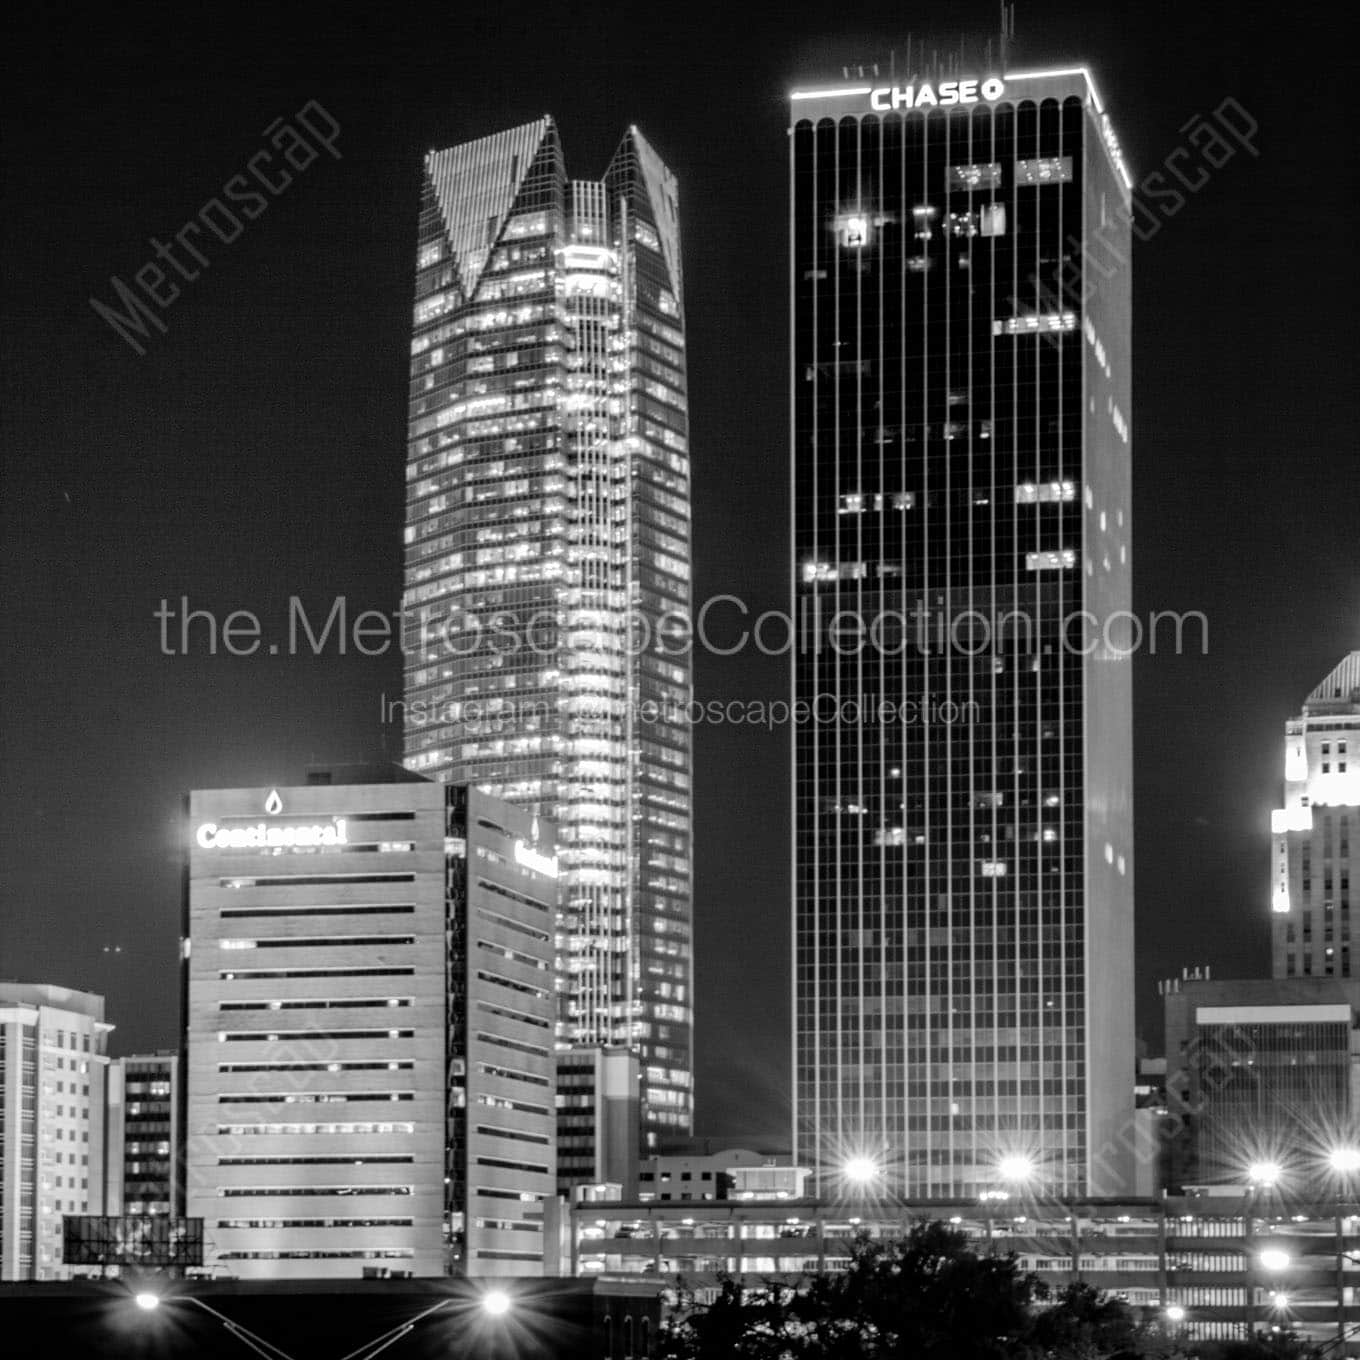 chase building devon tower at night Black & White Wall Art